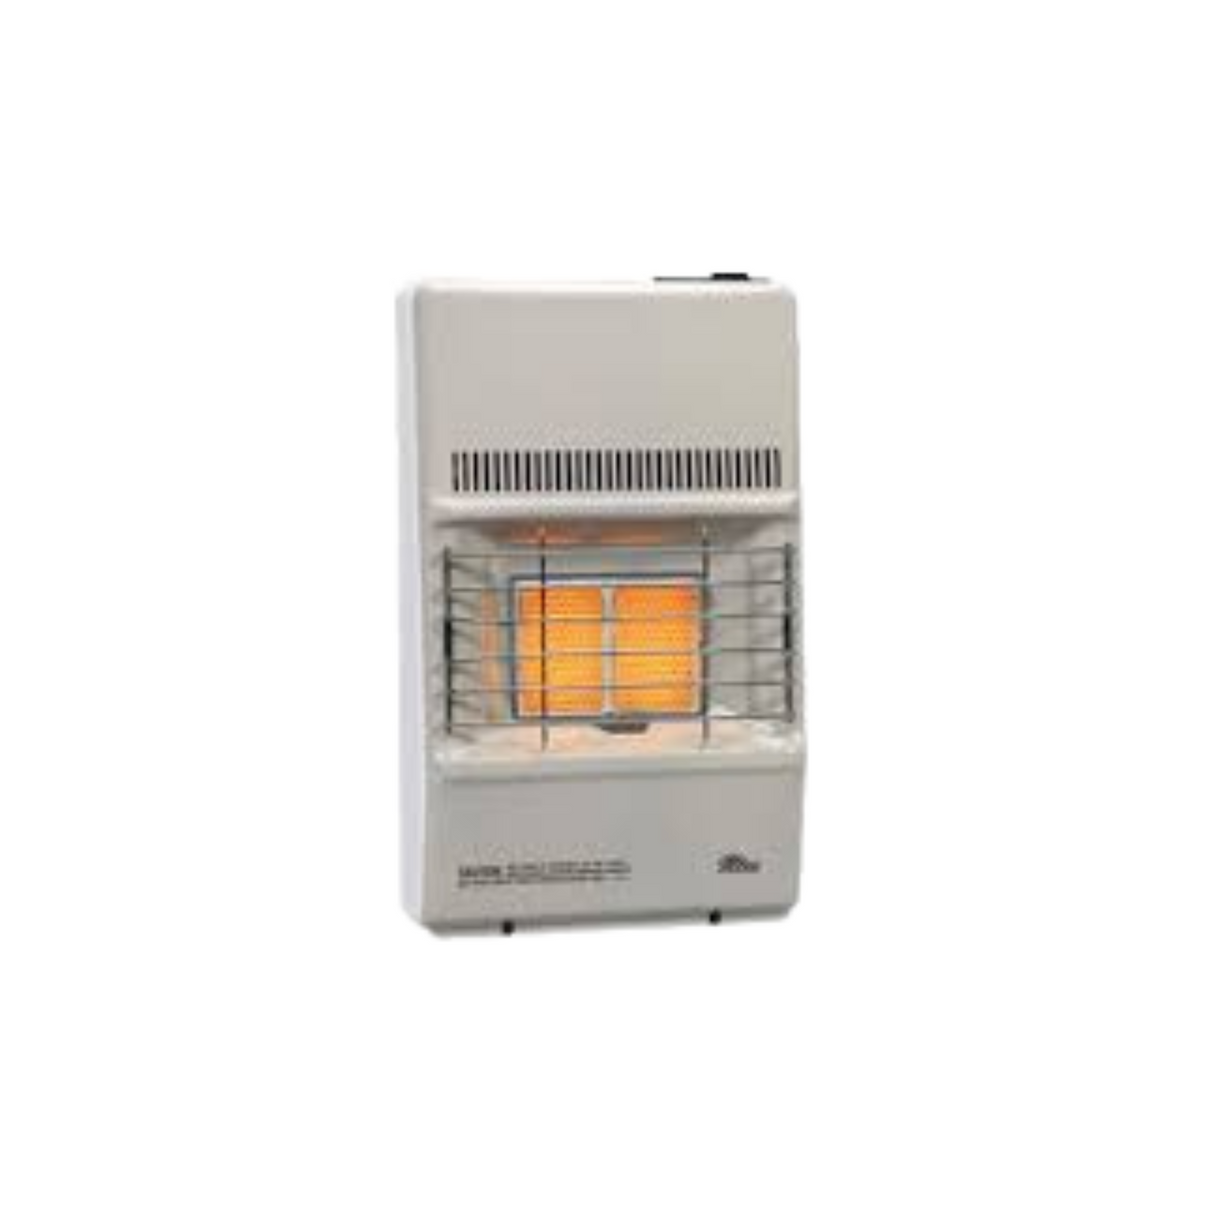 Sunstar Heating Products SC10T-LP 8500 BTU Thermostatic Vent Free Infrared/Radiant Heater, LP Gas